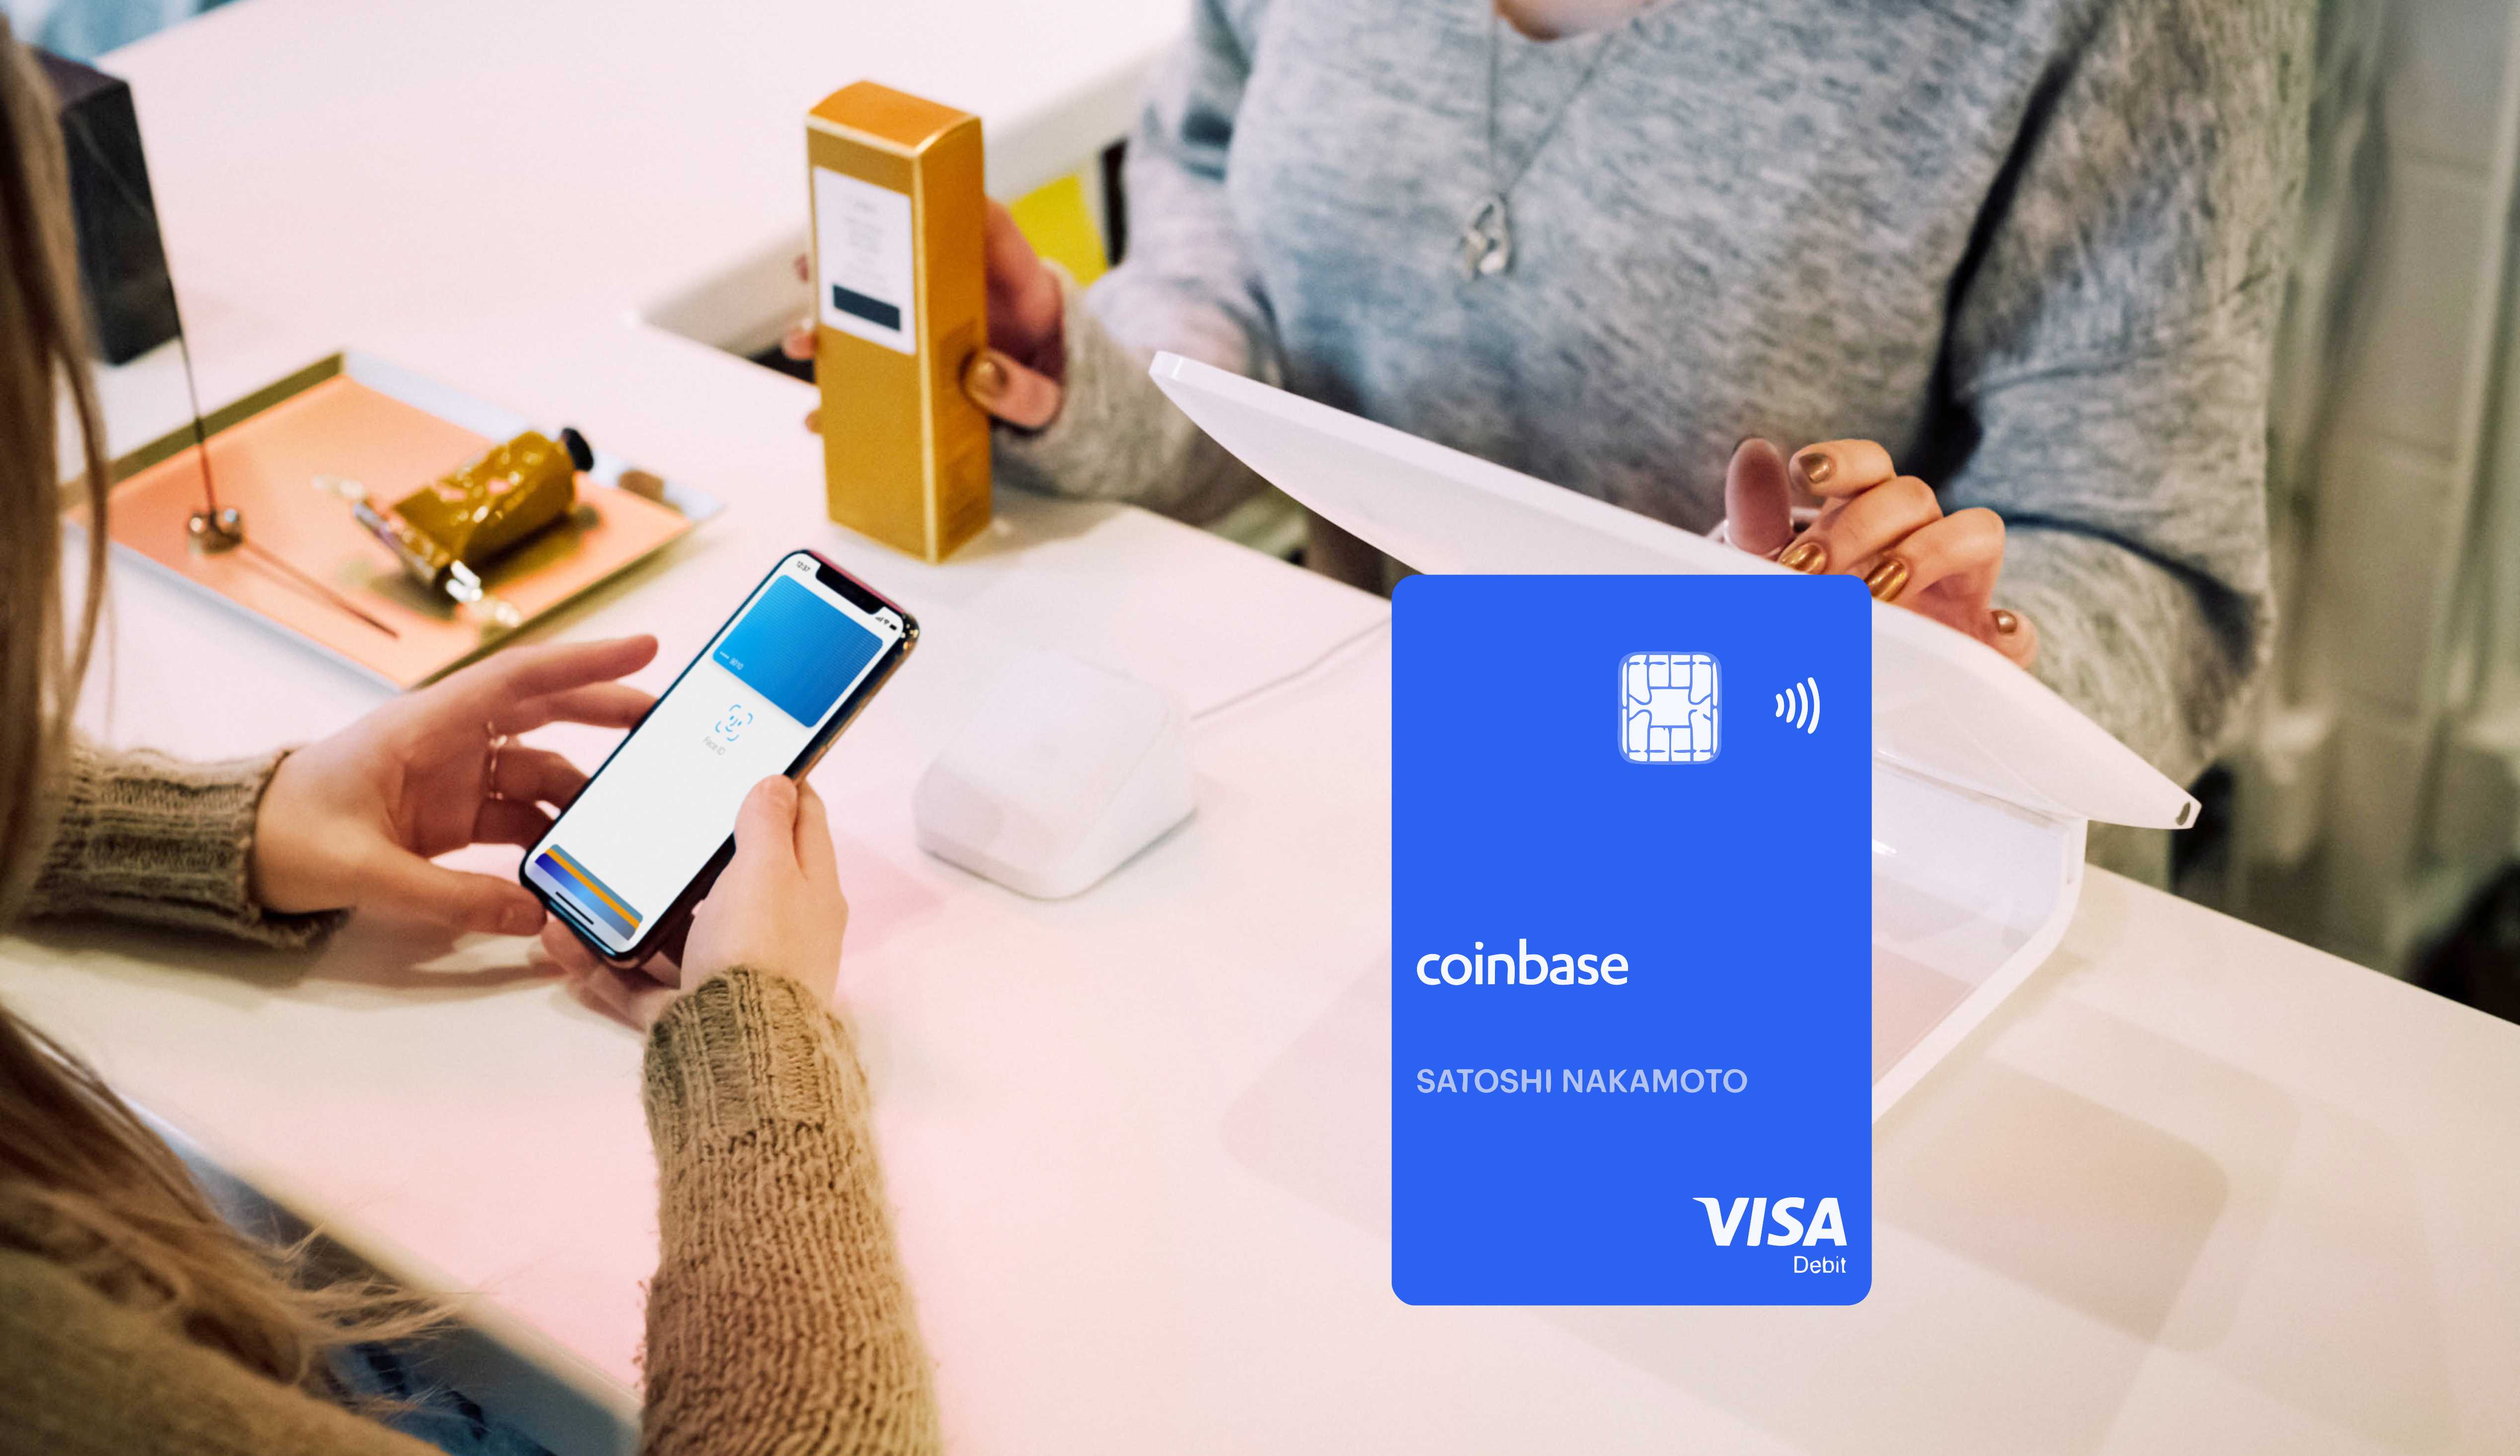 can you use a credit card on coinbase